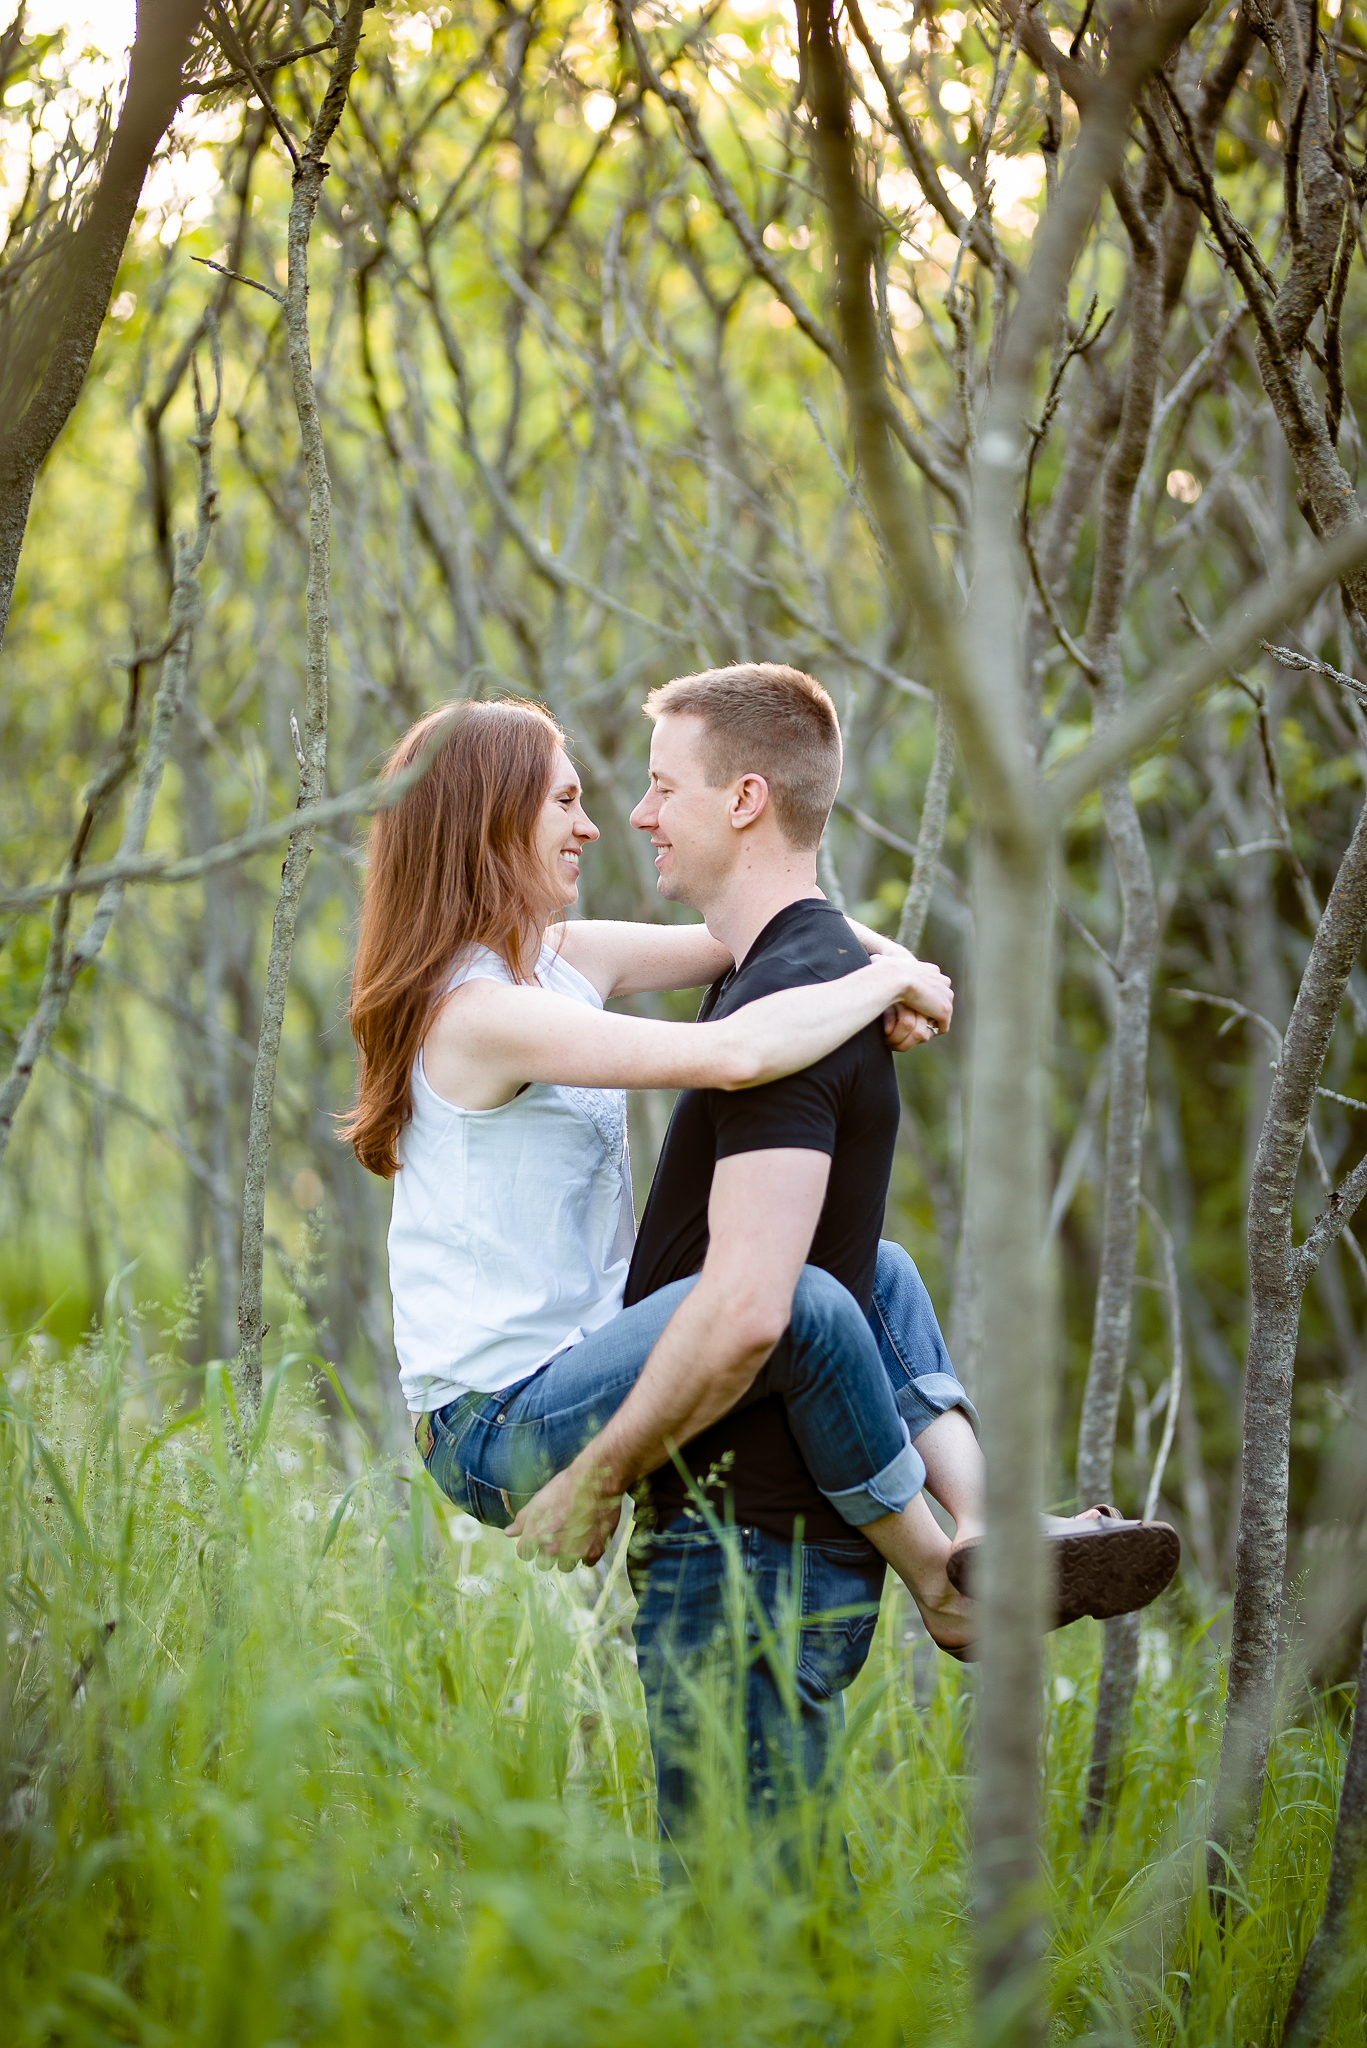 Couples330NaomiLuciennePhotography062019-Edit.jpg